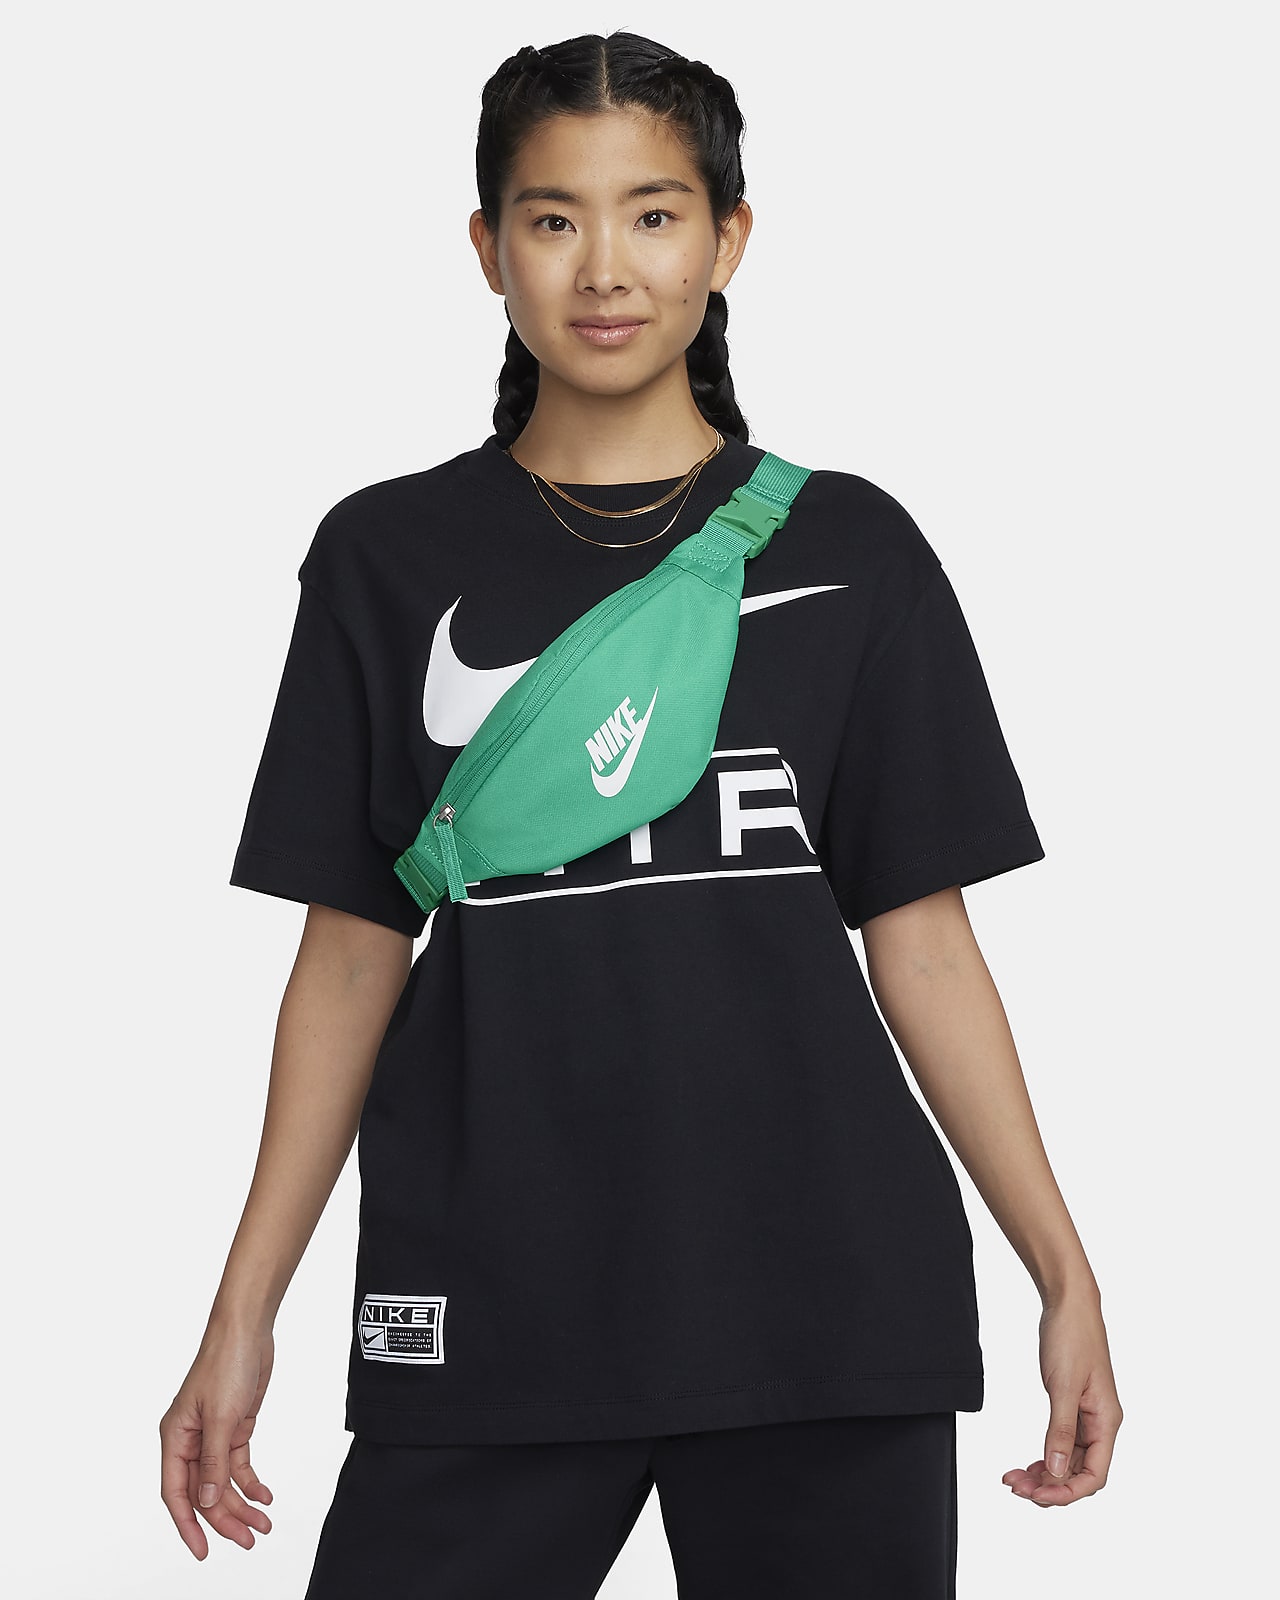 Sacoche banane Nike Pack 3.0 - Bagagerie - Equipements - Running